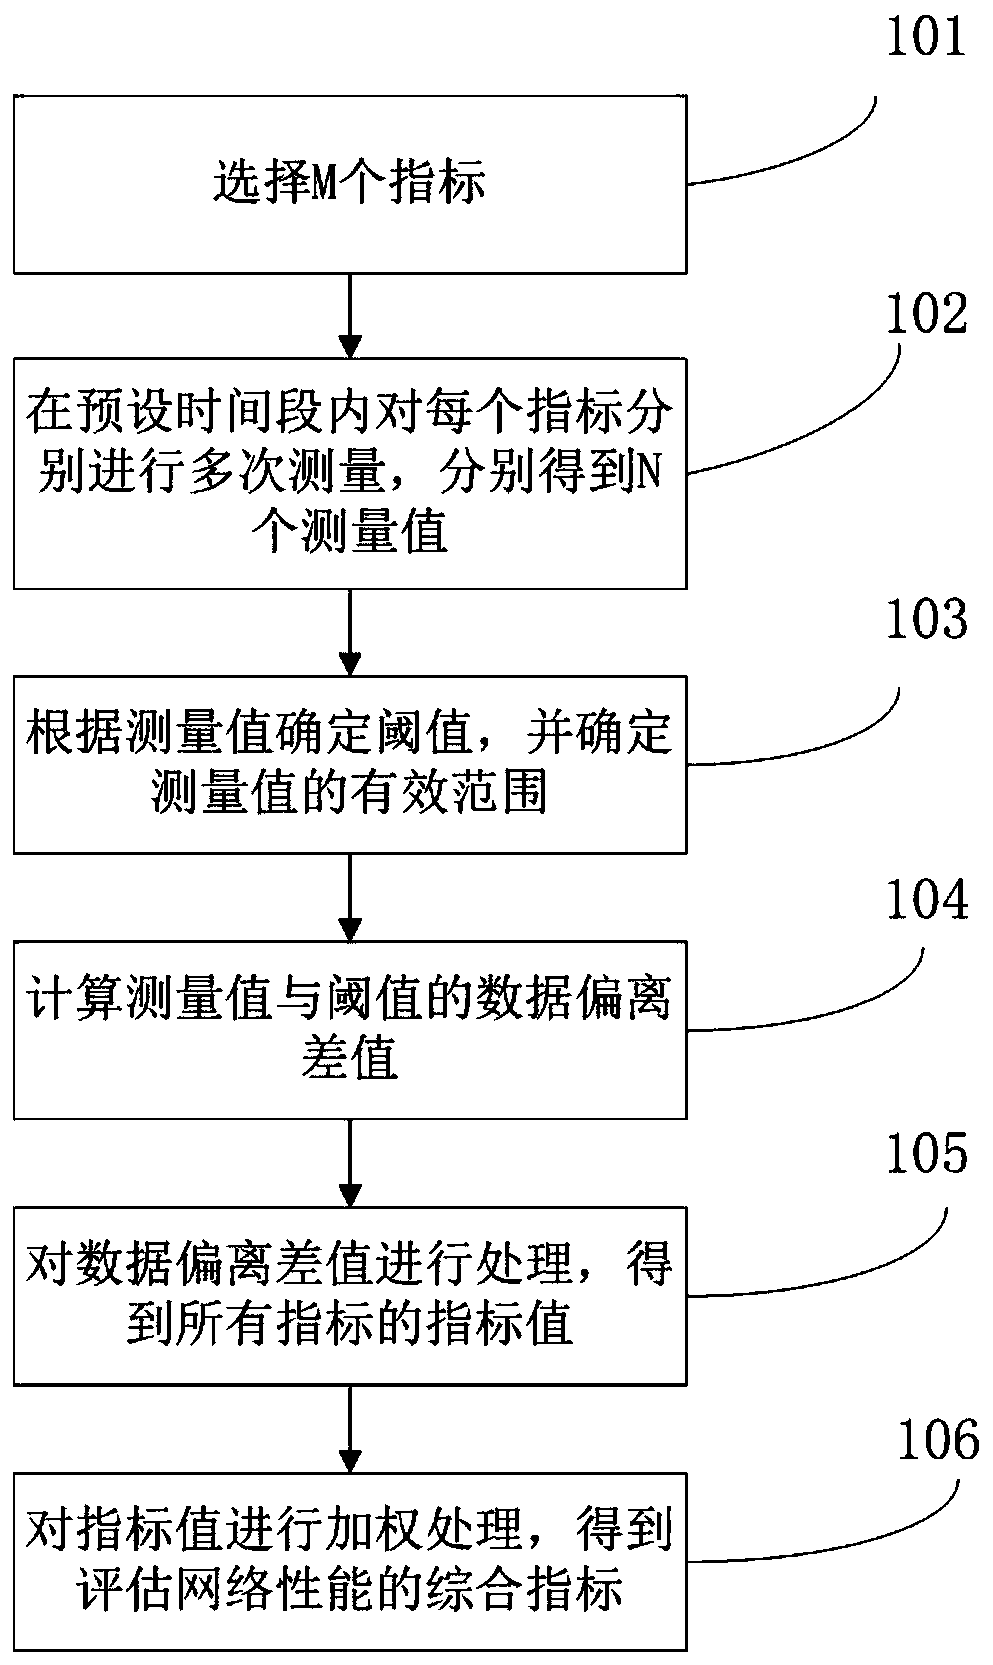 A method and apparatus for evaluating network performance